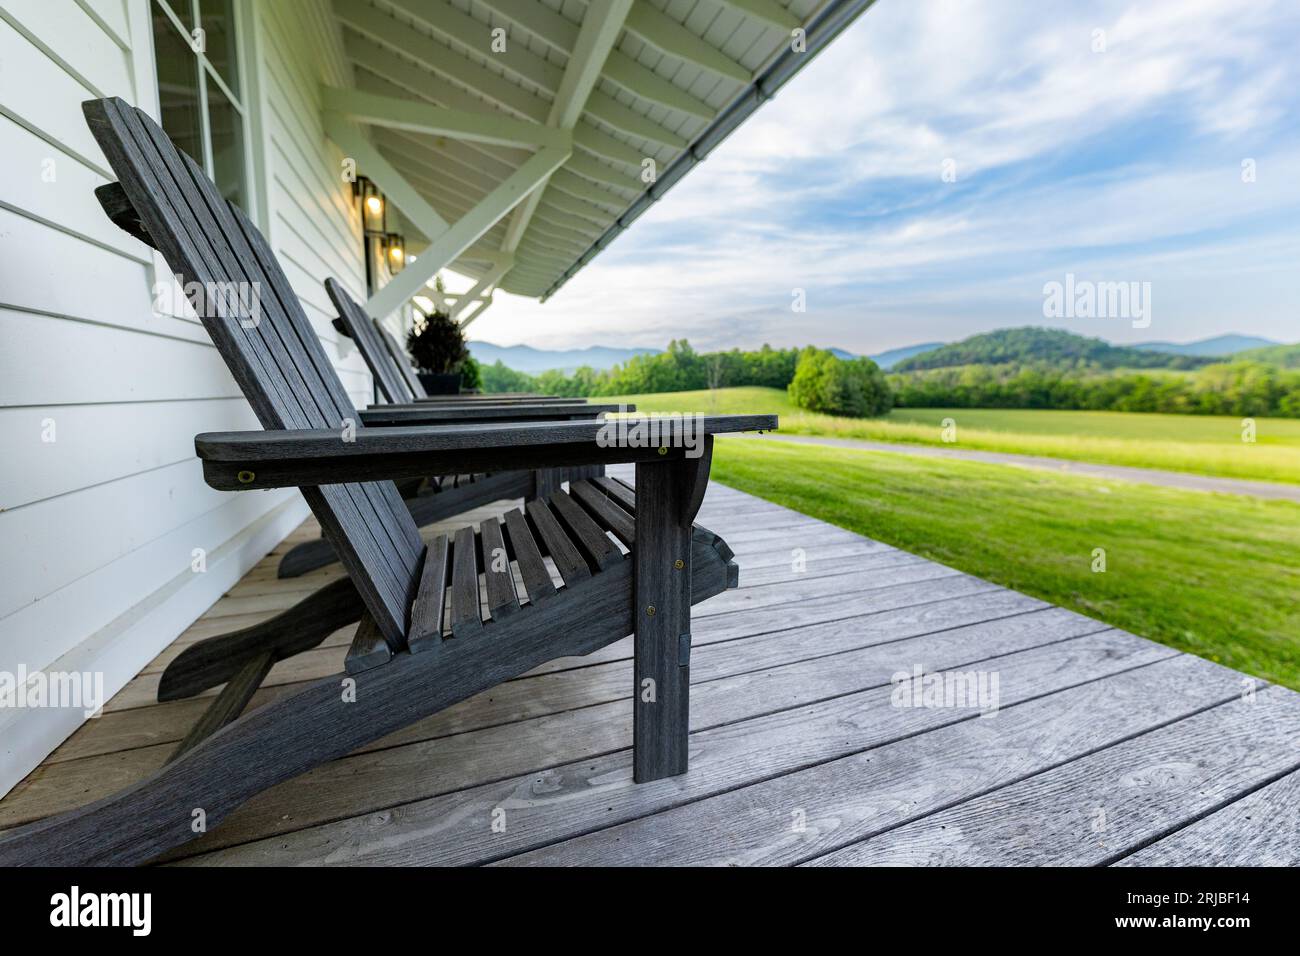 A wooden chair positioned on a veranda overlooking a grassy outdoor area Stock Photo